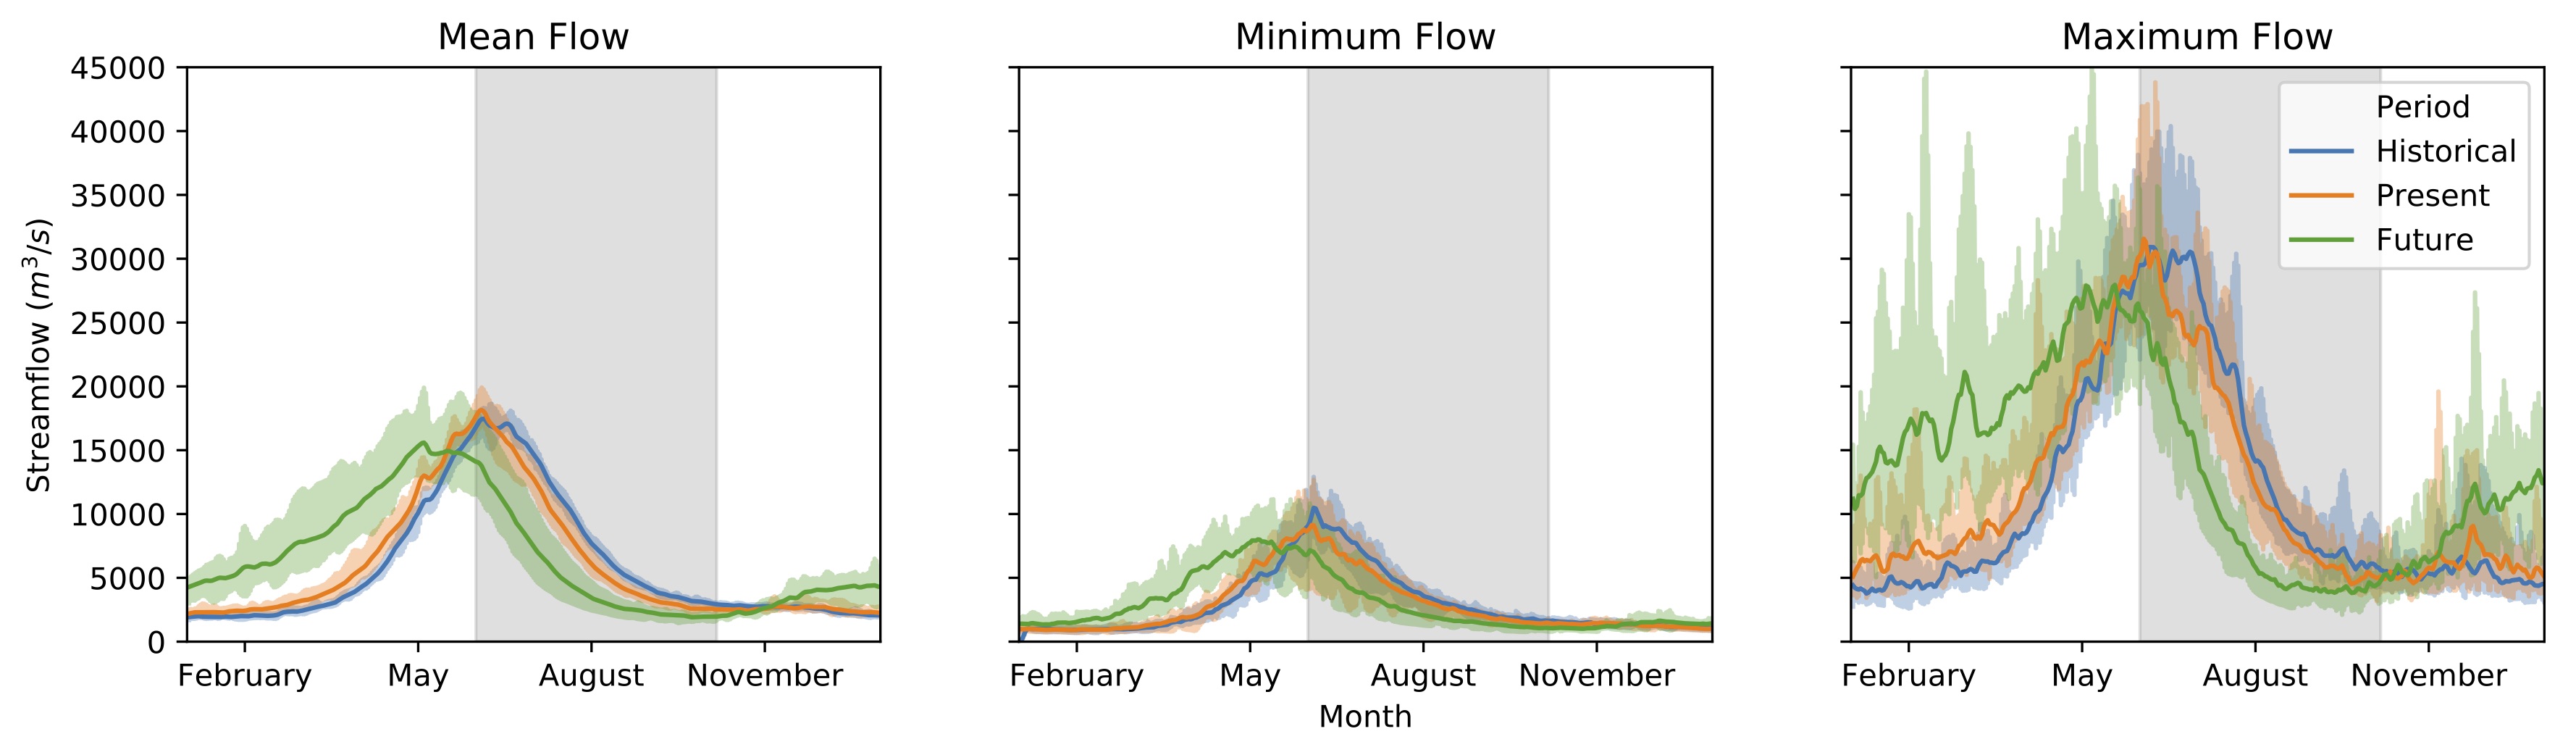 Plots of mean, min, and max flows of the ensemble runs.